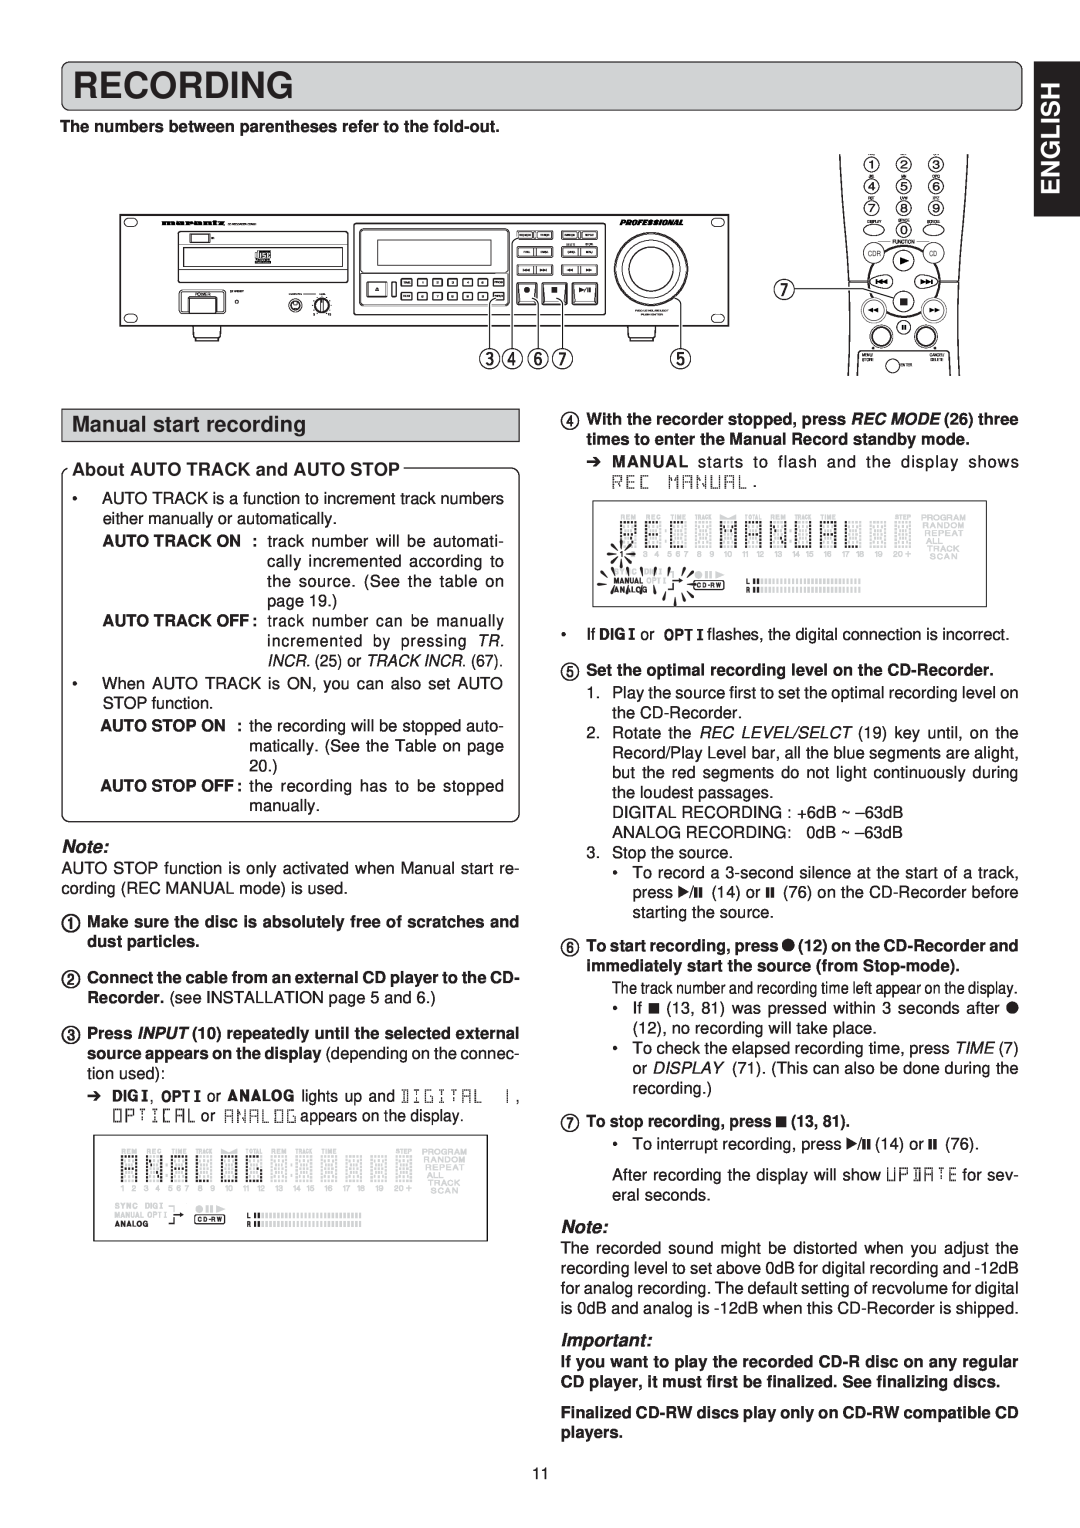 Marantz CDR631 eryu, Manual start recording, About AUTO TRACK and AUTO STOP, Recording, English, To stop recording, press 